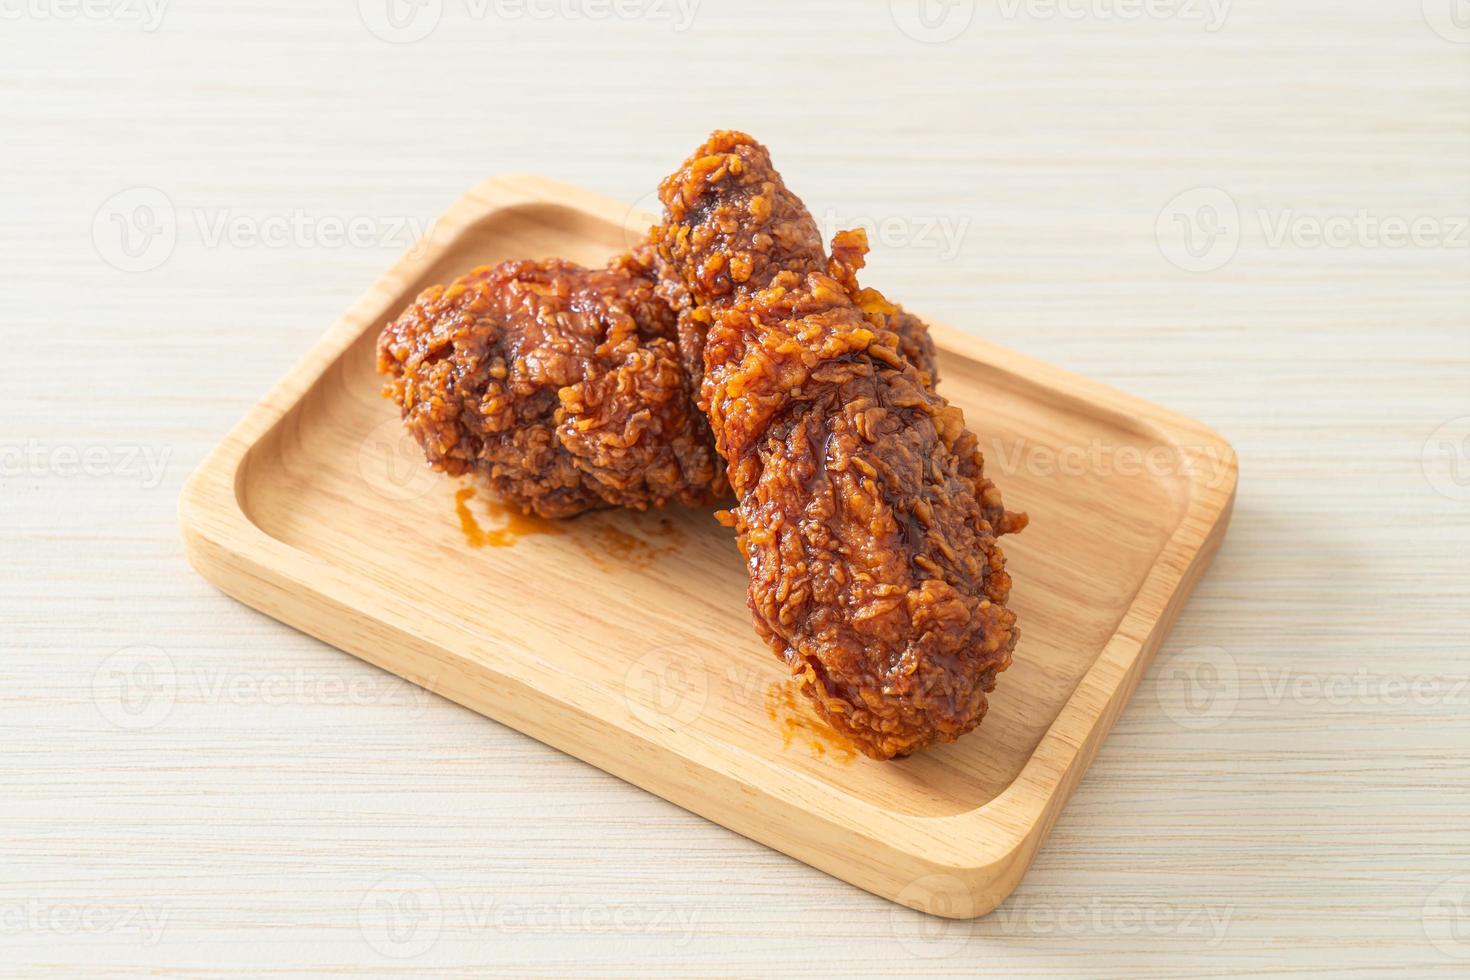 Fried chicken on wood photo